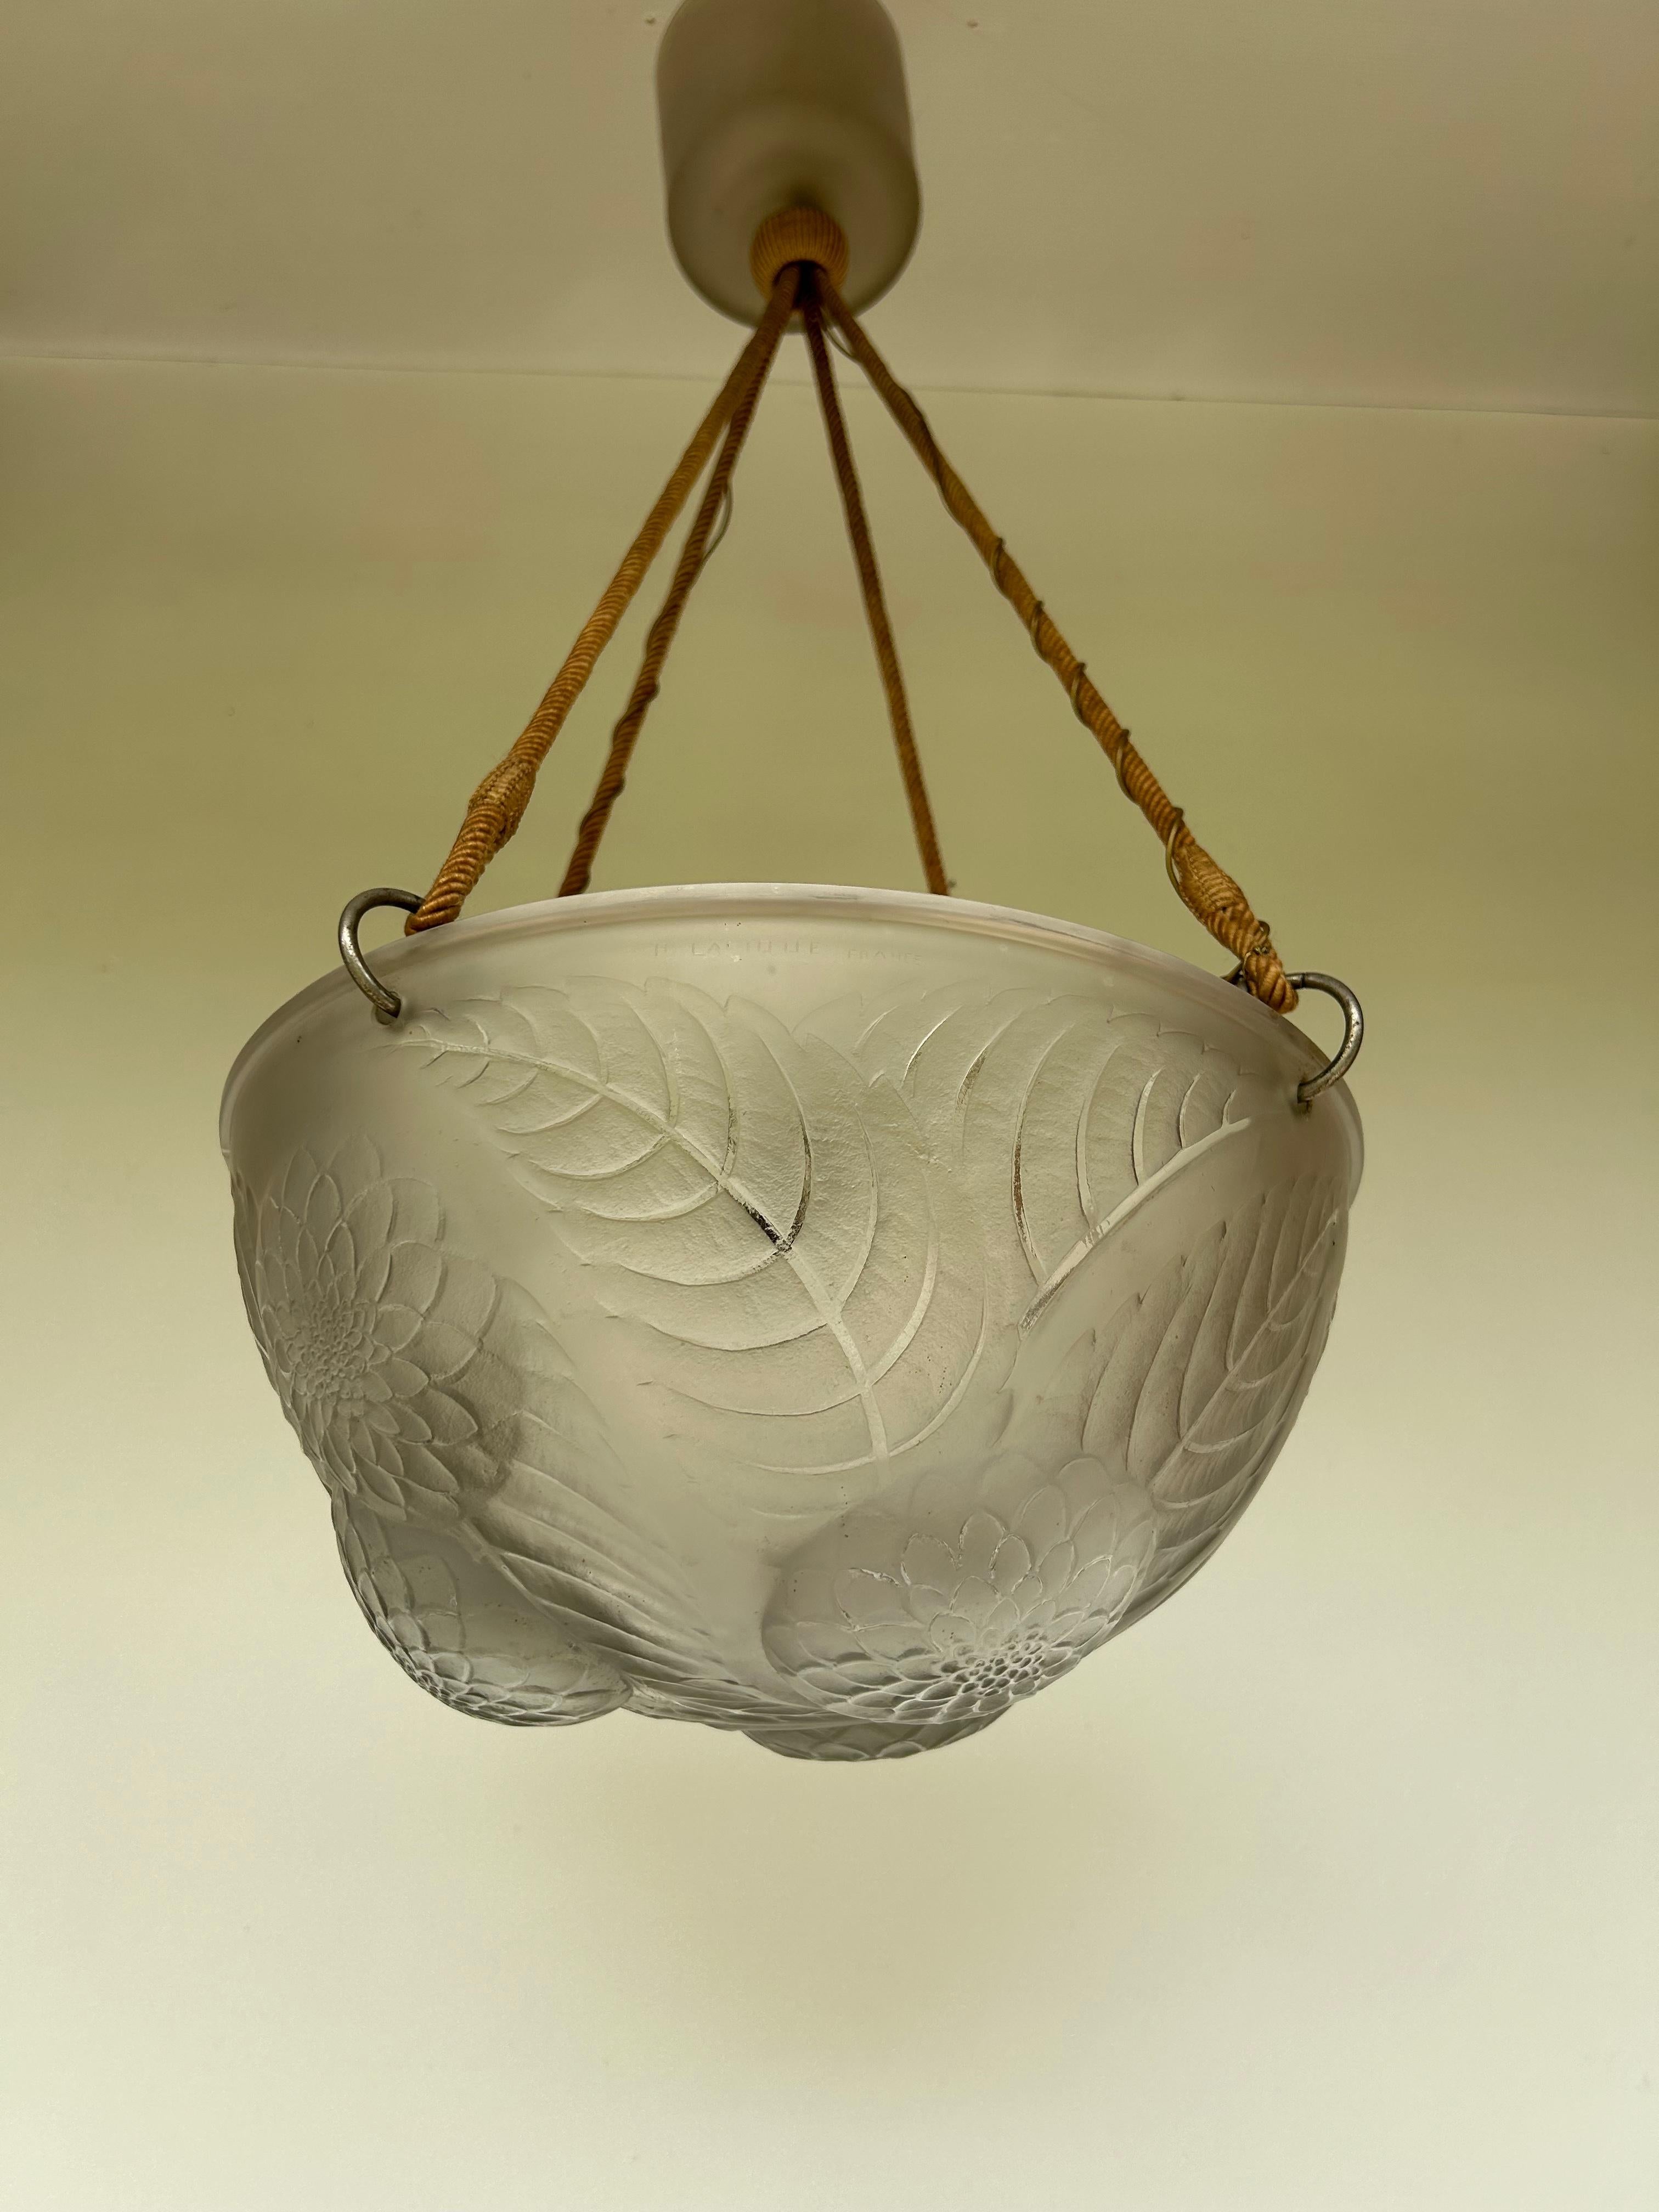 Suspension in pressed molded glass by René Lalique. Dahlias model, created in 1921 and produced until 1932.
This suspension is electrified, in perfect condition.
Signature molded on the glass in two places 